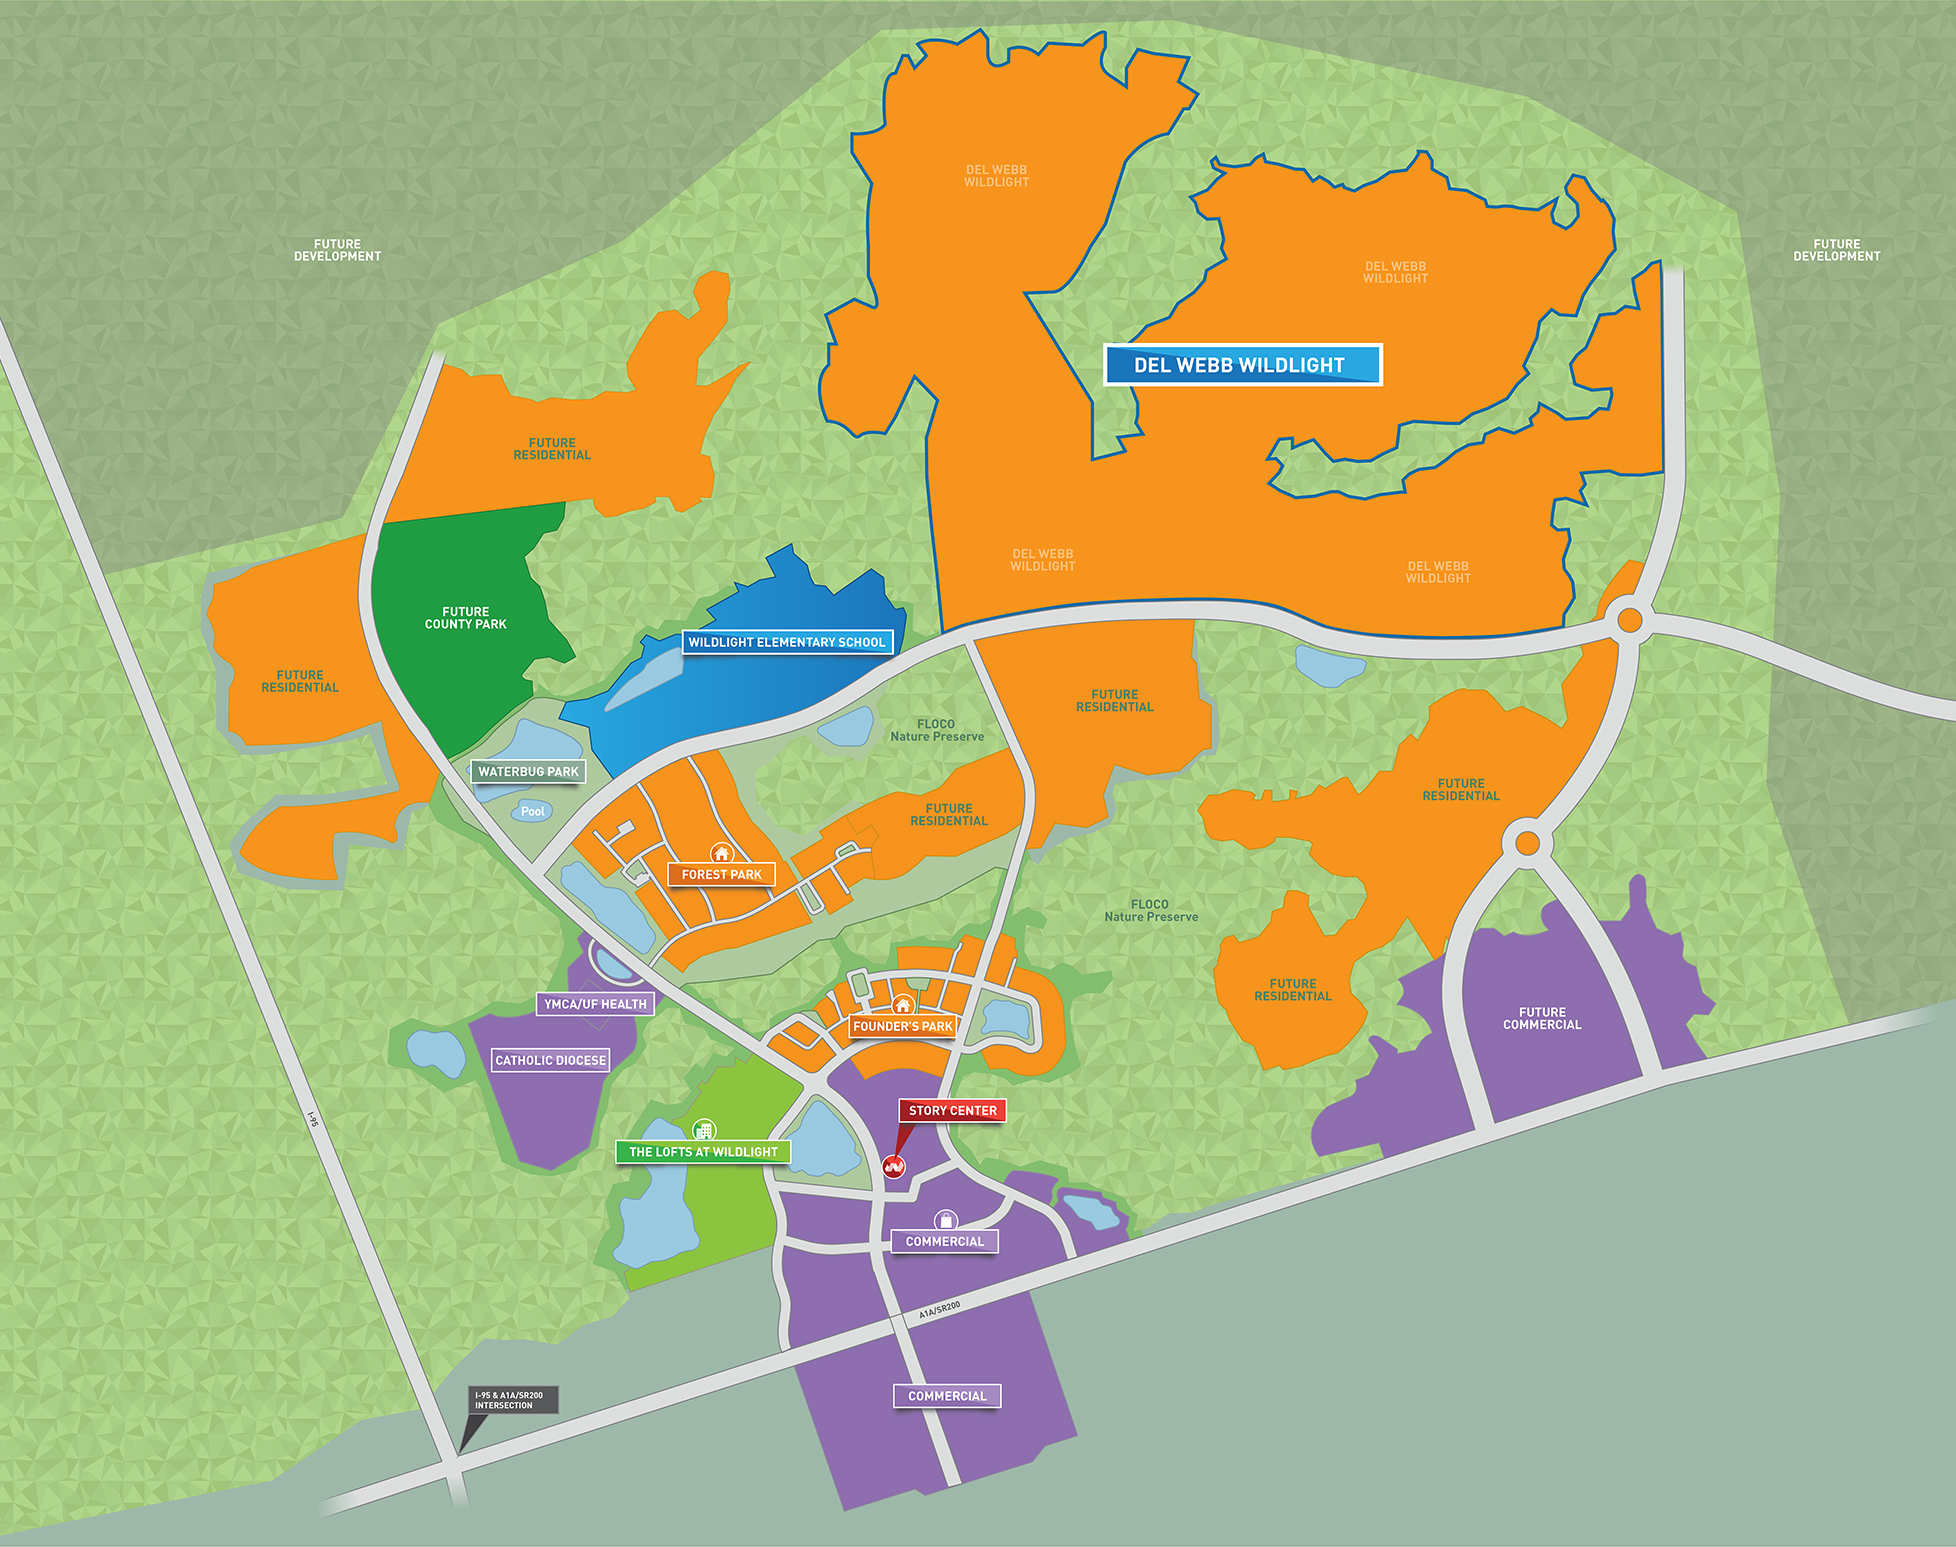 A map of the Del Webb Wildlight area.